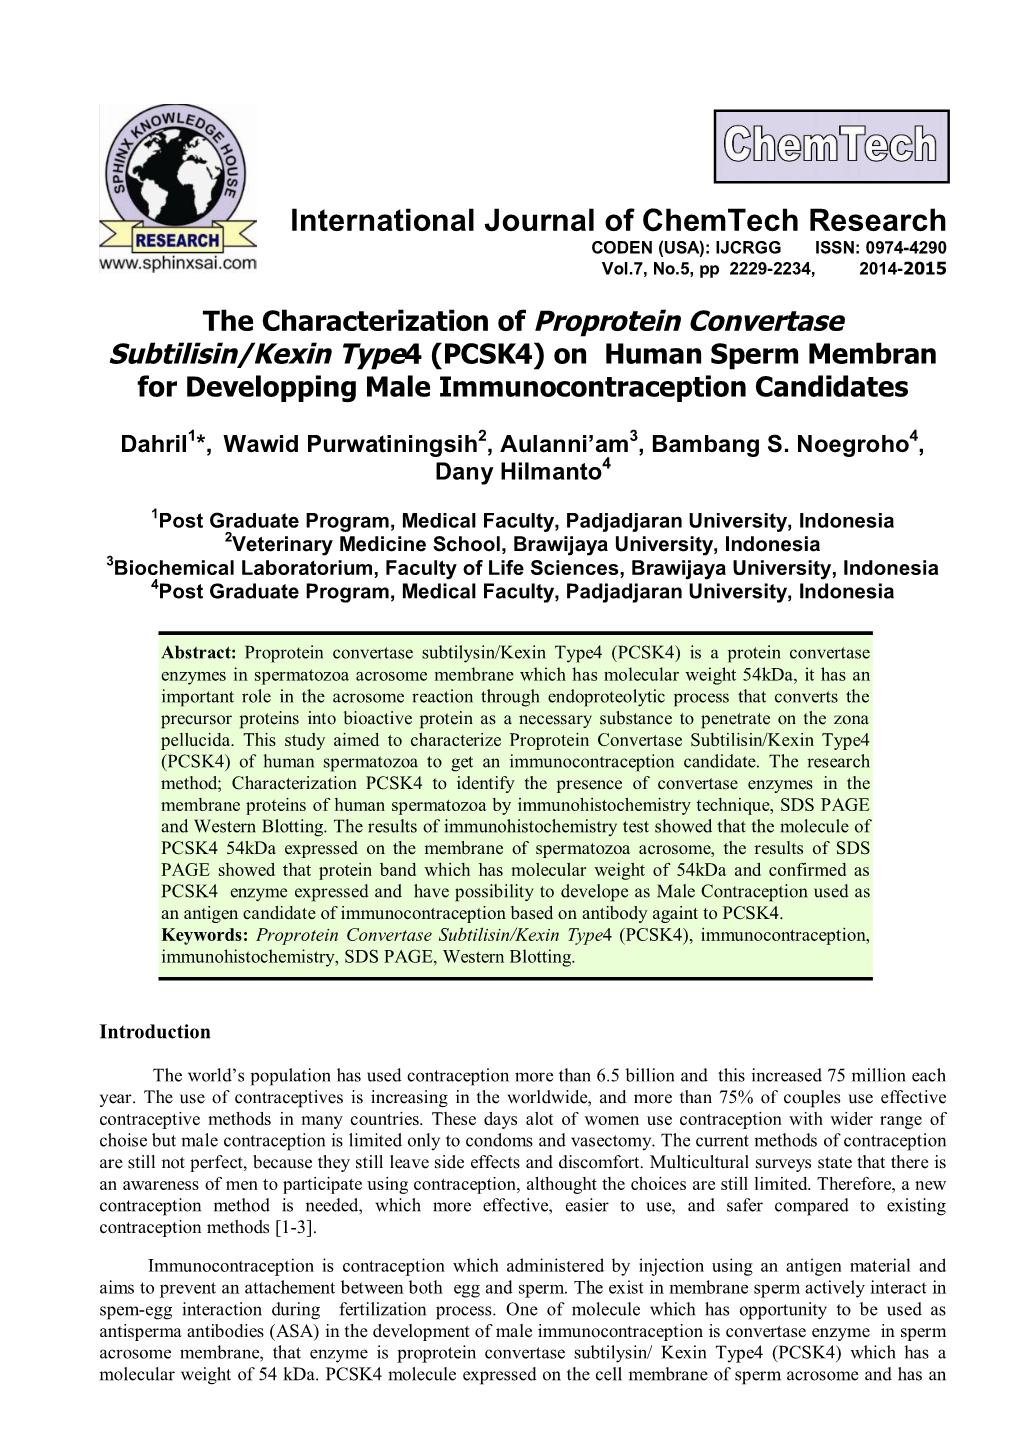 The Characterization of Proprotein Convertase Subtilisin/Kexin Type4 (PCSK4) on Human Sperm Membran for Developping Male Immunocontraception Candidates